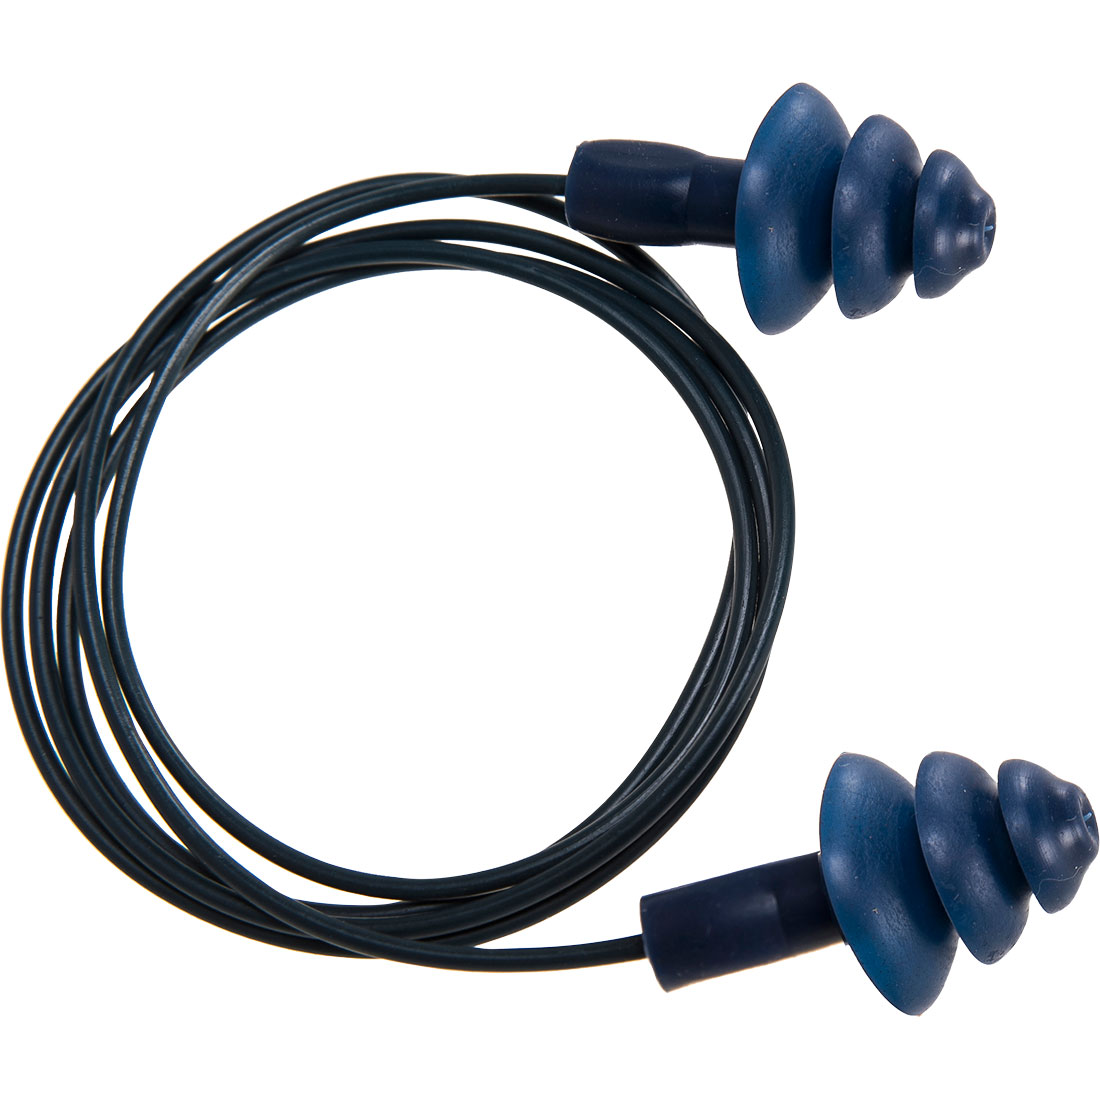 Detectable+TPR+Corded+Ear+Plugs+%2850+pairs%29+Blue